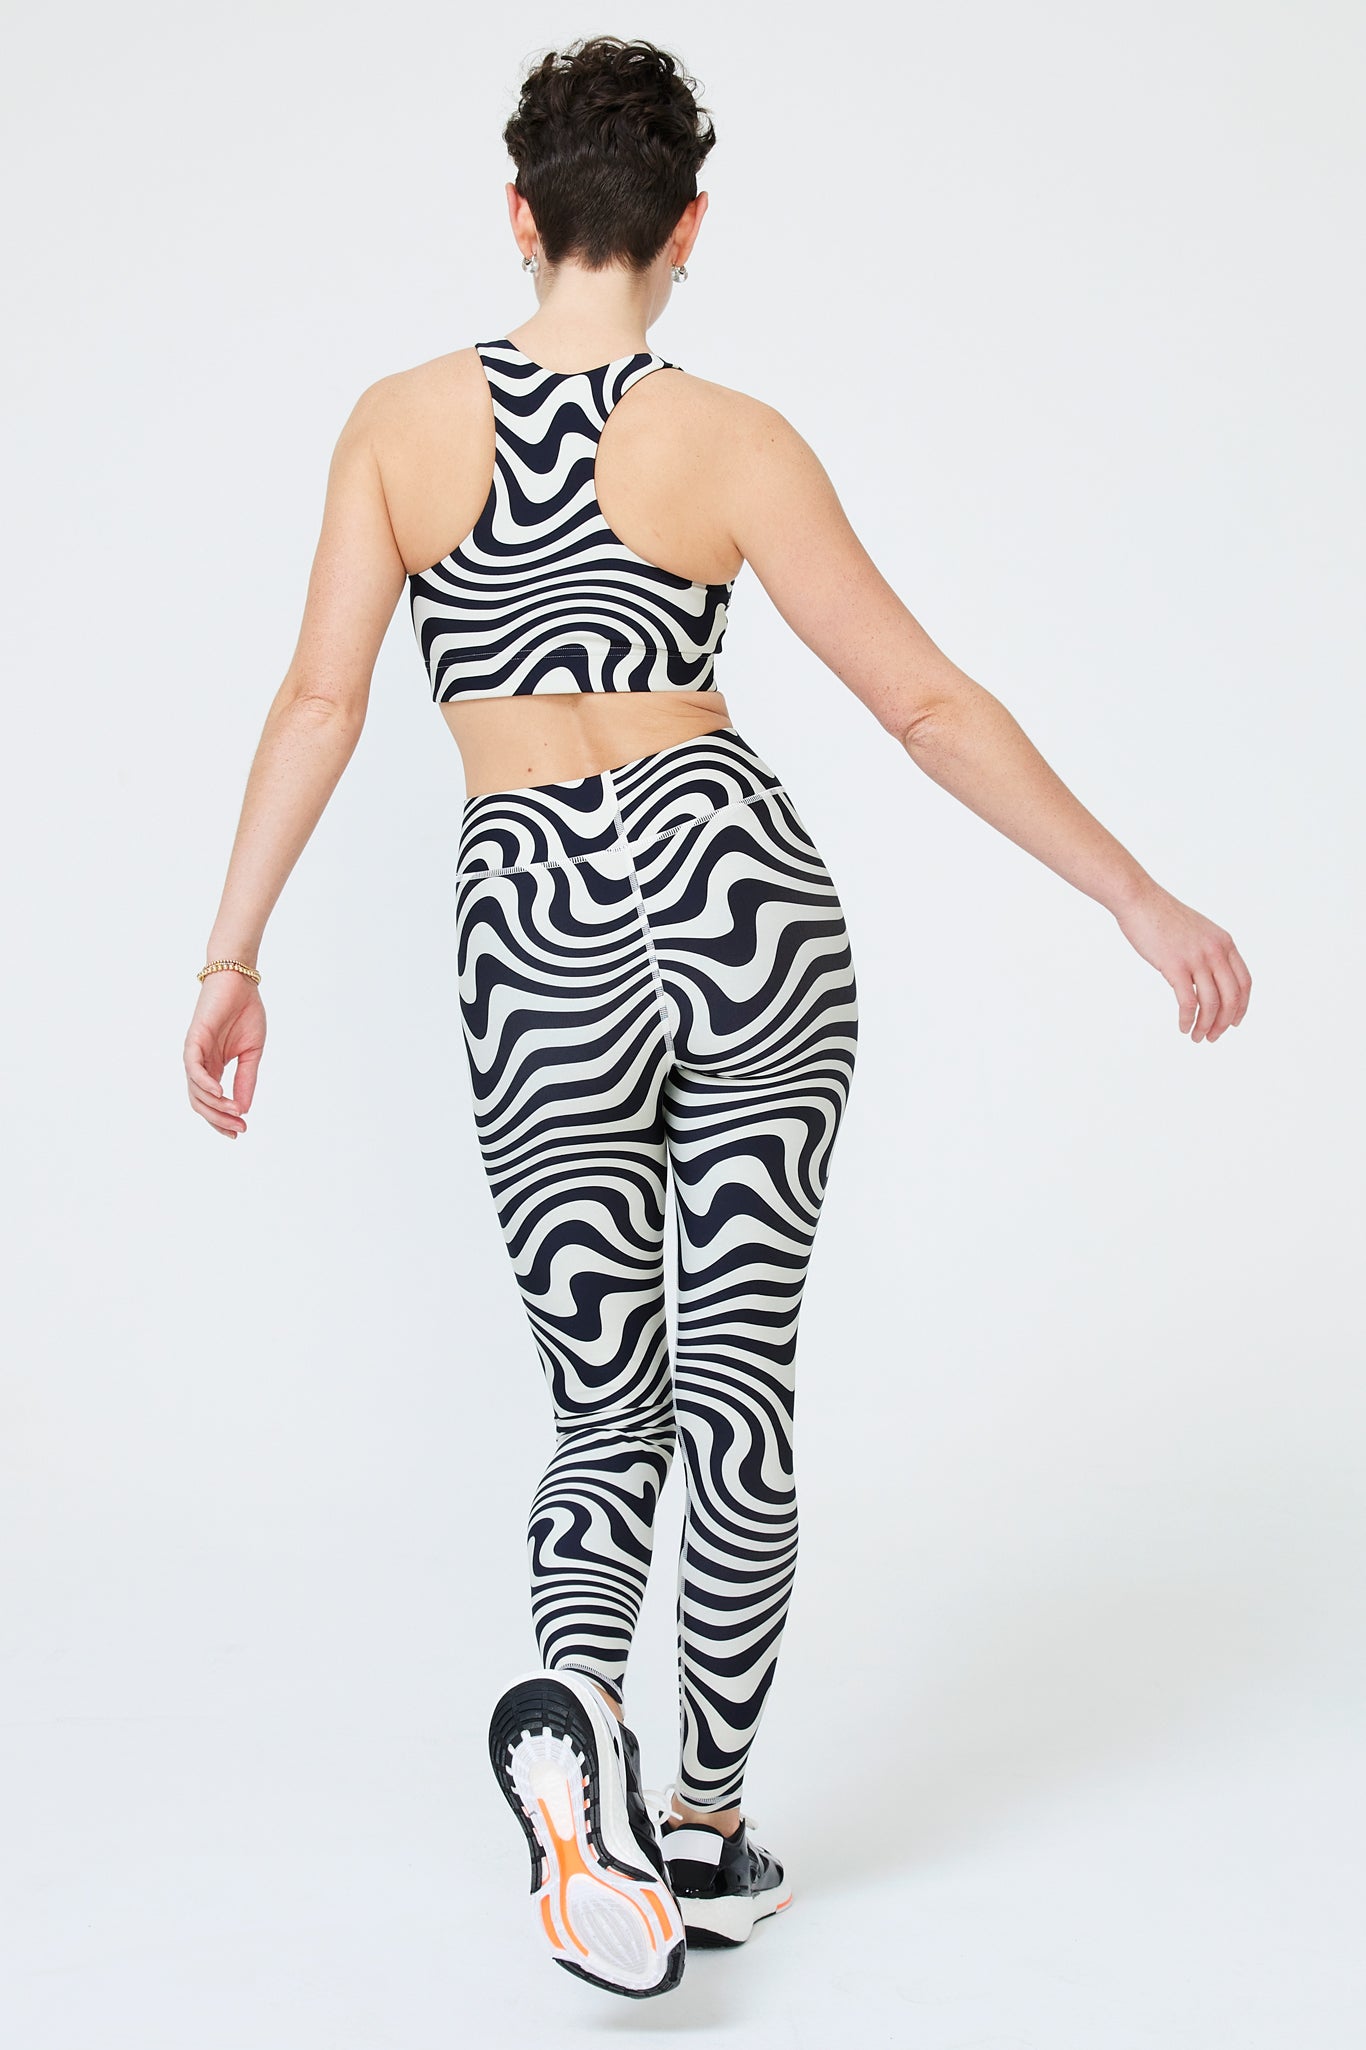 DuoKnit Leggings in Black and White Wave –